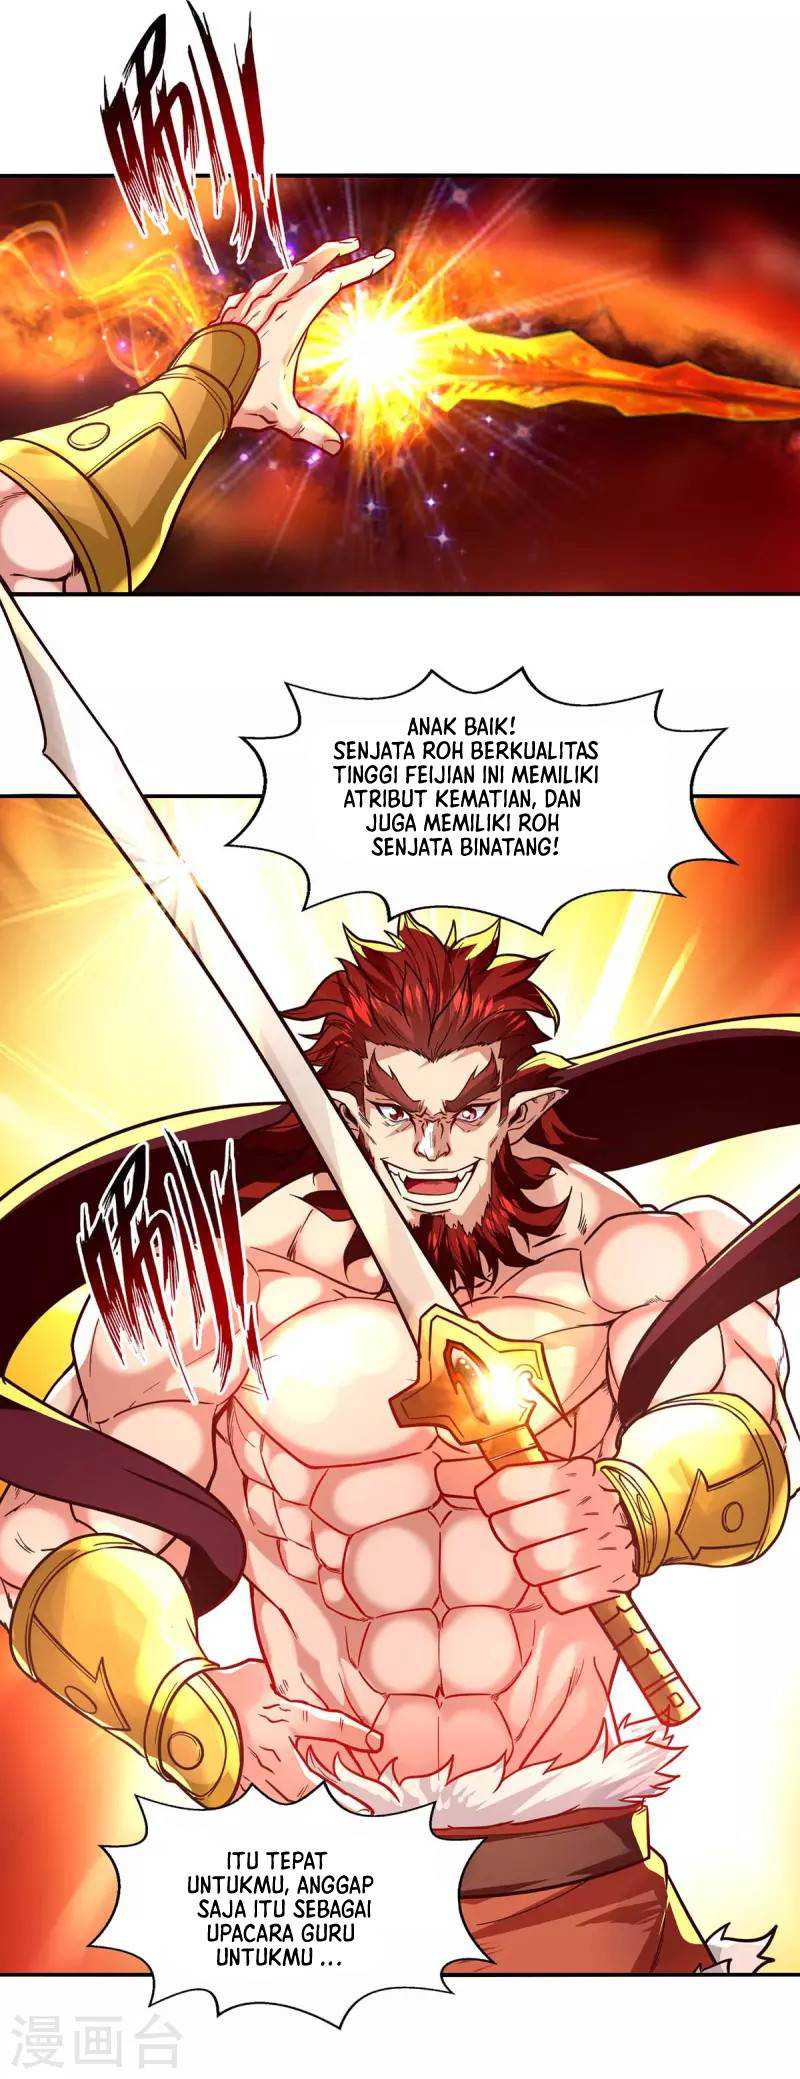 Against The Heaven Supreme (Heaven Guards) Chapter 90 - 139